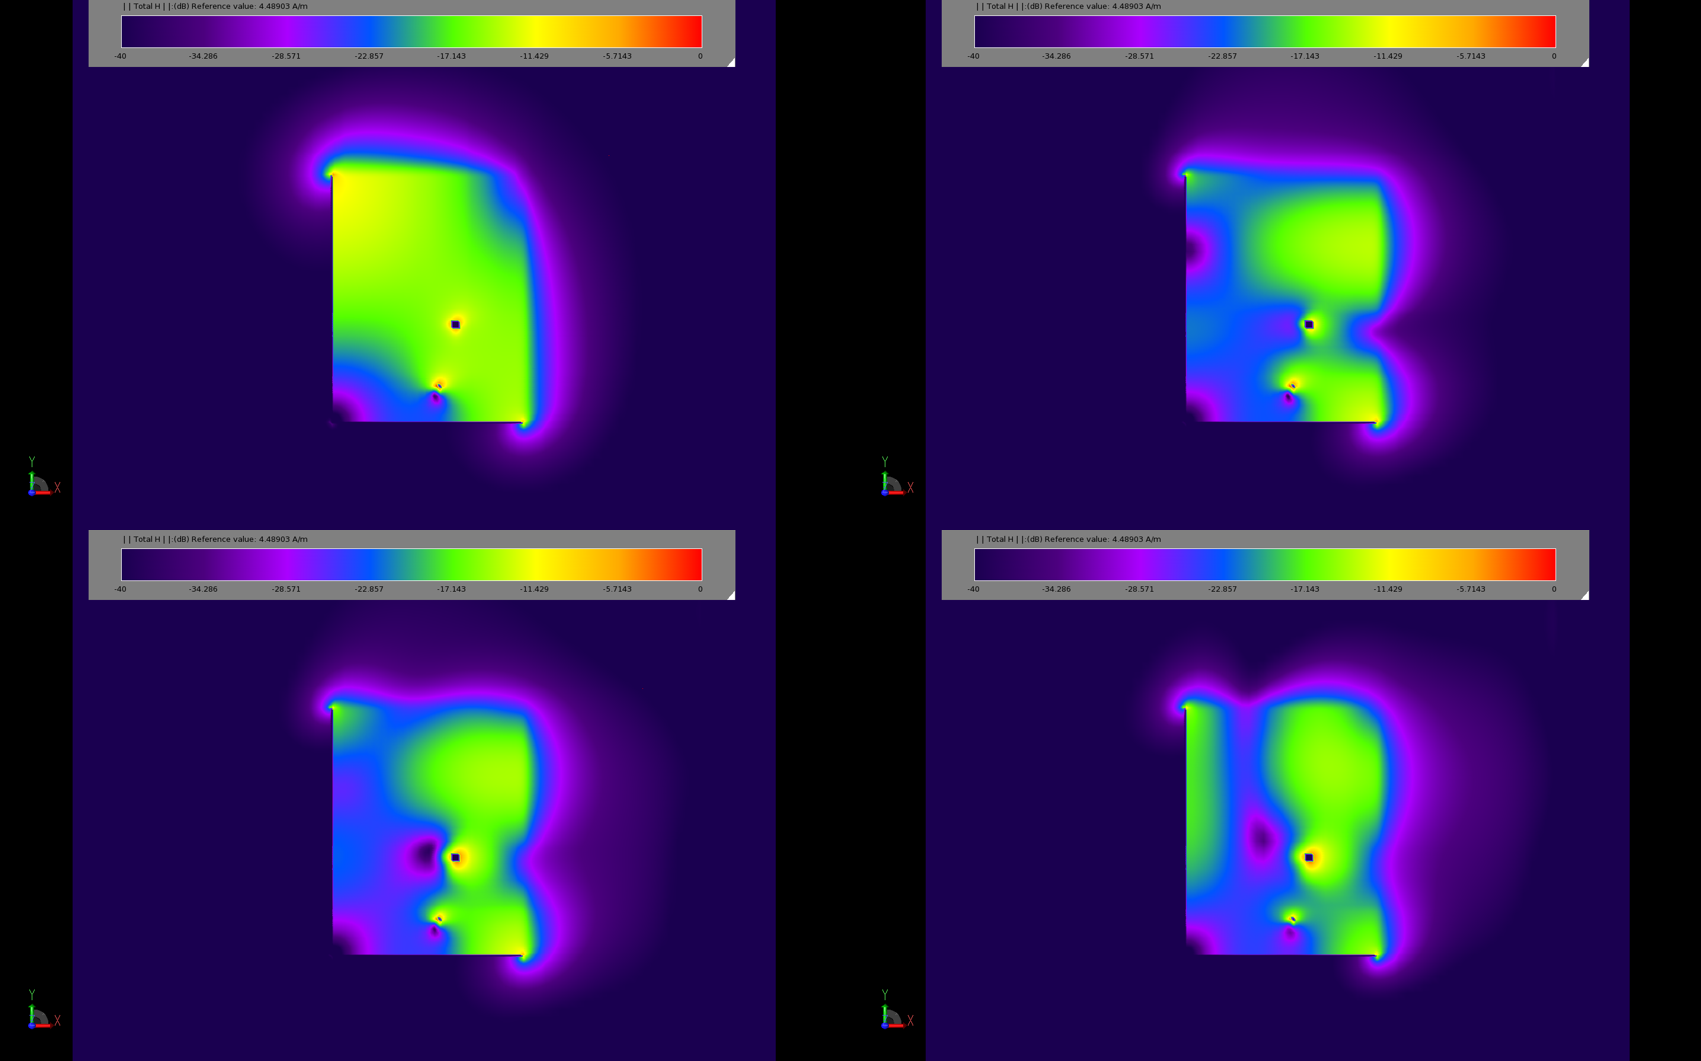 Figure 3: Plots of the steady state magnetic field distribution show the different operating modes of the patch. The top left image (3a) is at 2.45 GHz while the top right (3b) is at 5.2 GHz. The bottom two images (3c and 3d) show the response at 5.…